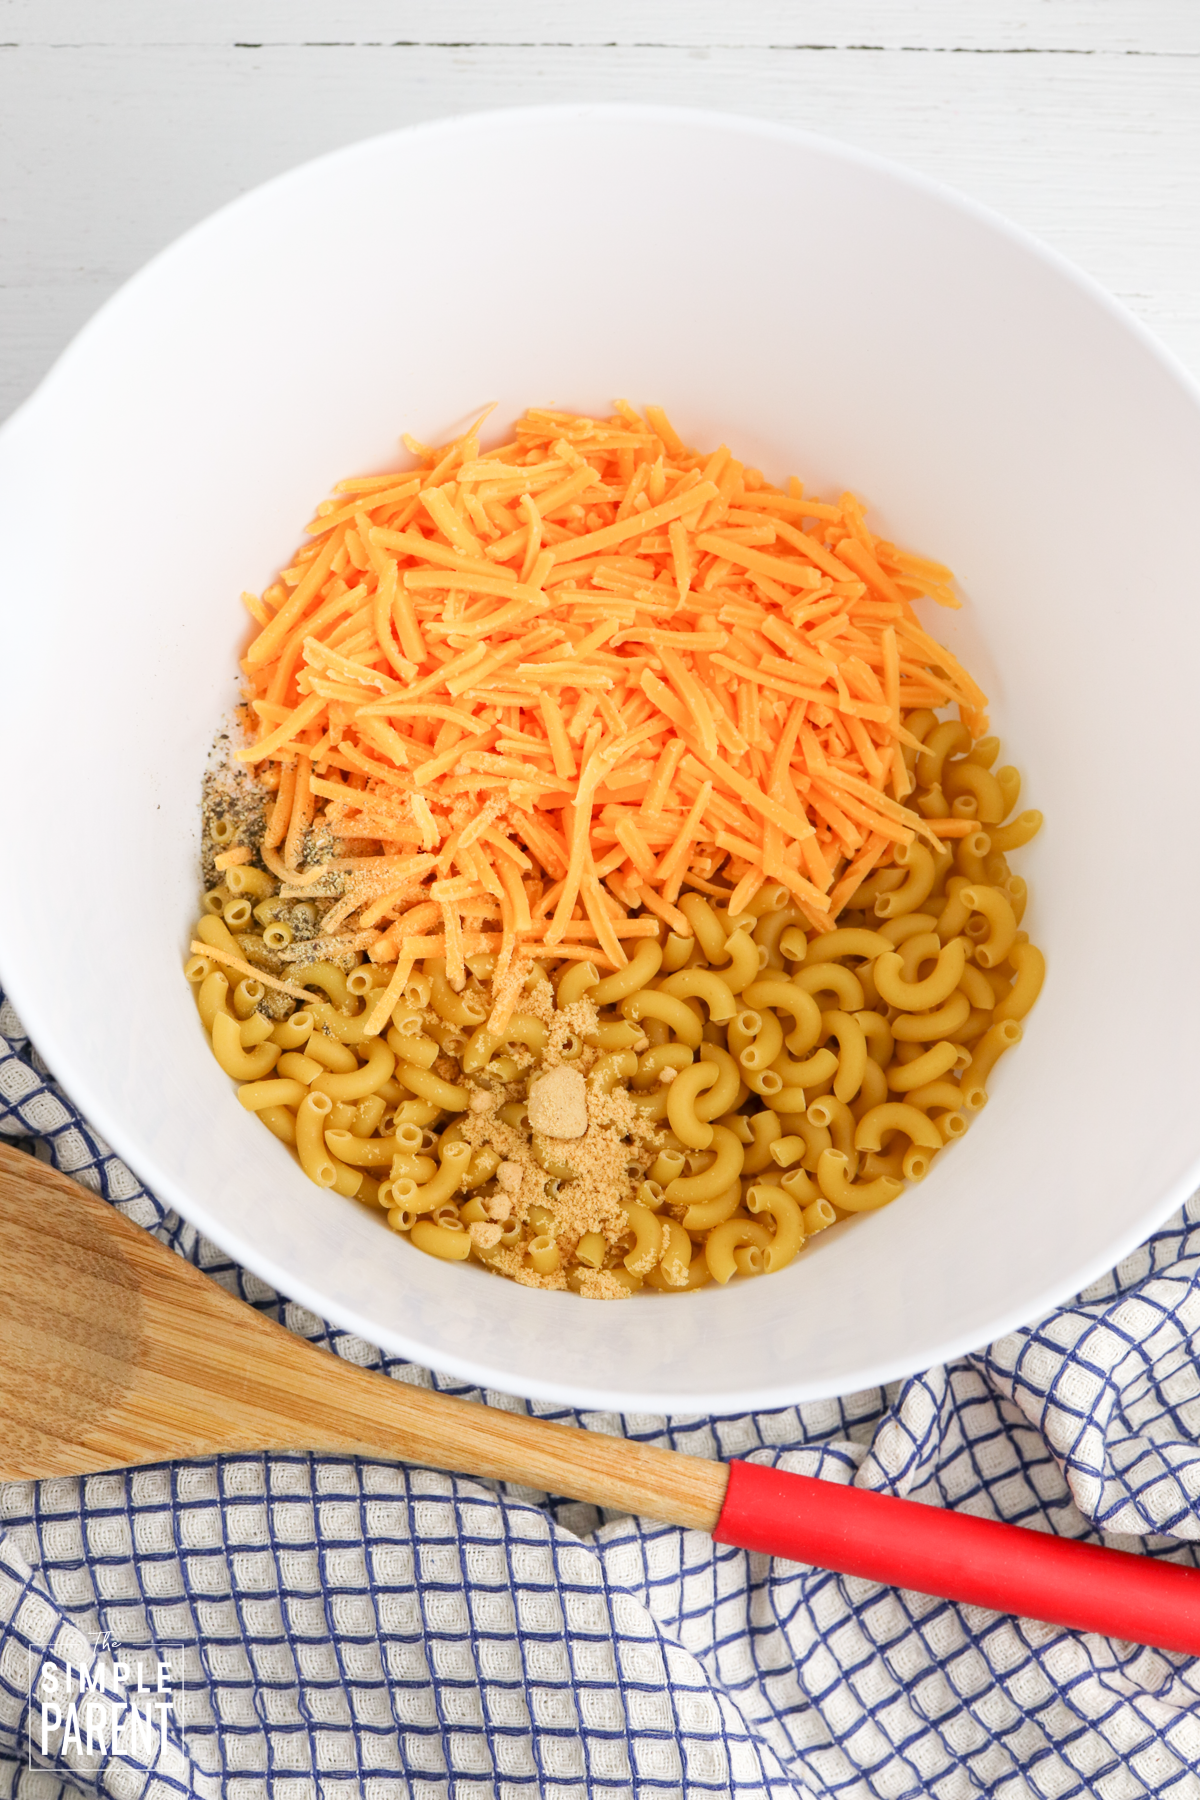 White mixing bowl with air-baked mac and cheese ingredients - elbow macaroni, shredded cheddar cheese and seasonings.